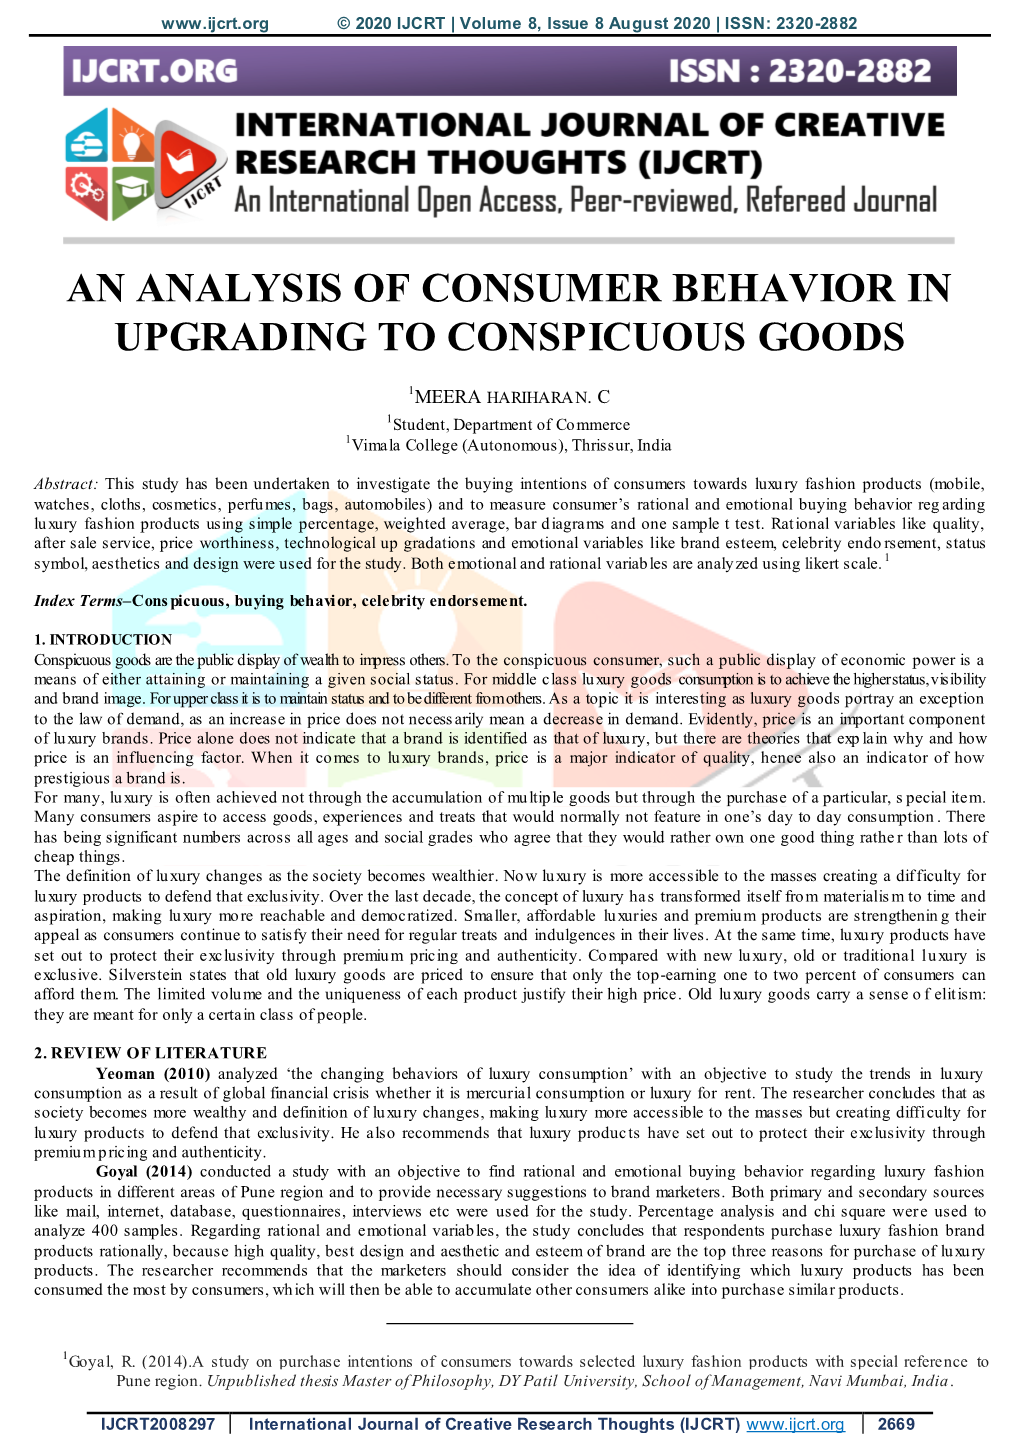 An Analysis of Consumer Behavior in Upgrading to Conspicuous Goods